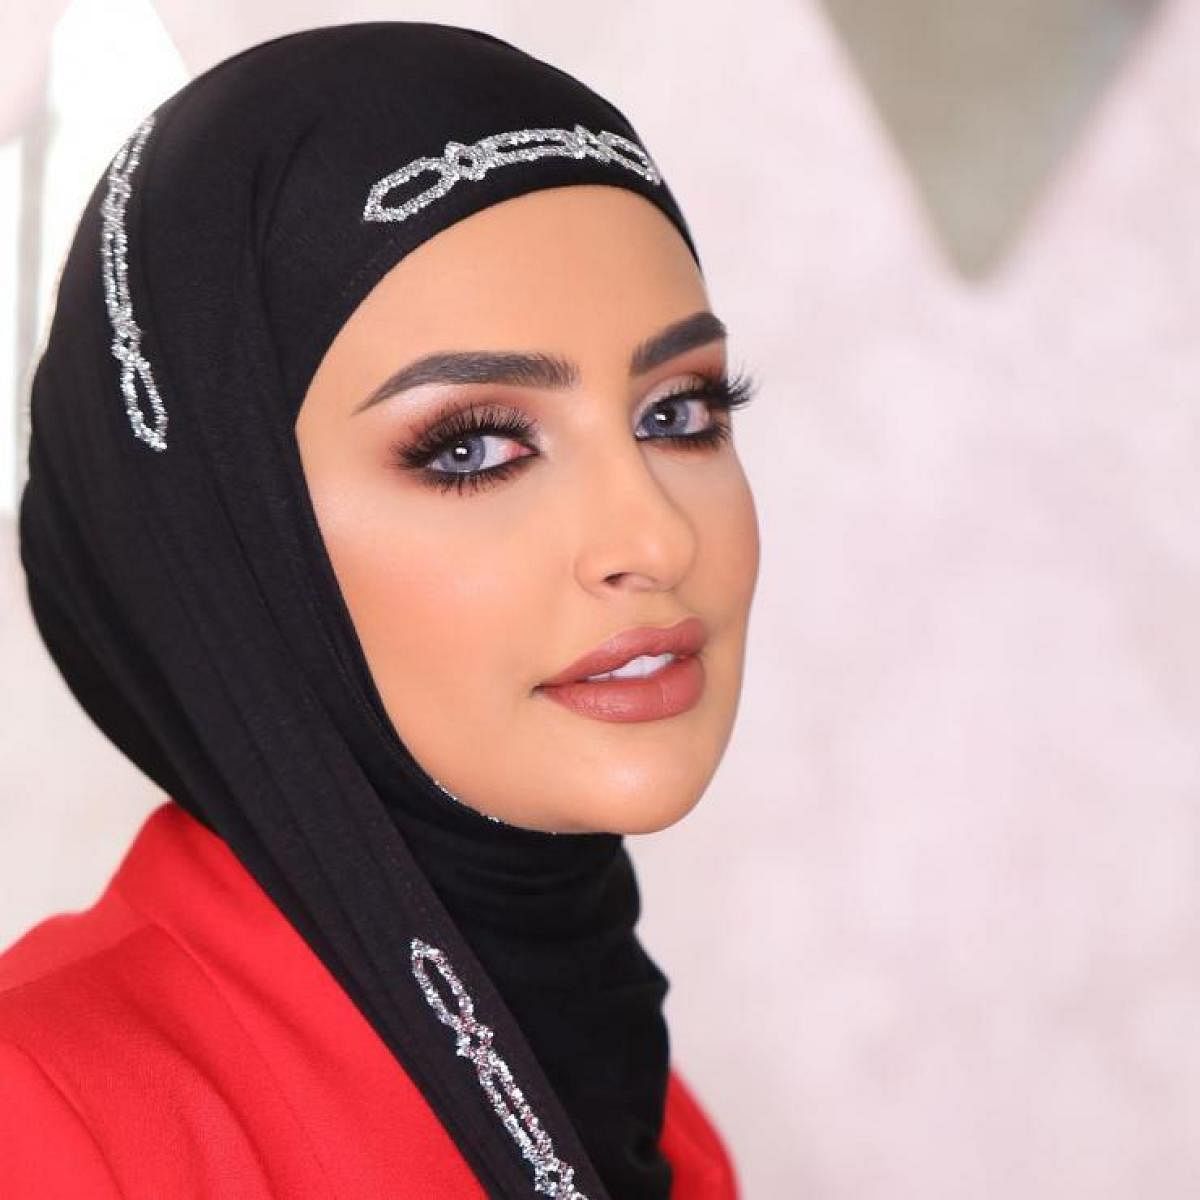 Kuwaiti Instagram star Sondo al-Qattan is facing backlash for her comments on Filipino migrant workers, which have been described as modern day slavery. (Instagram/sondos_aq)